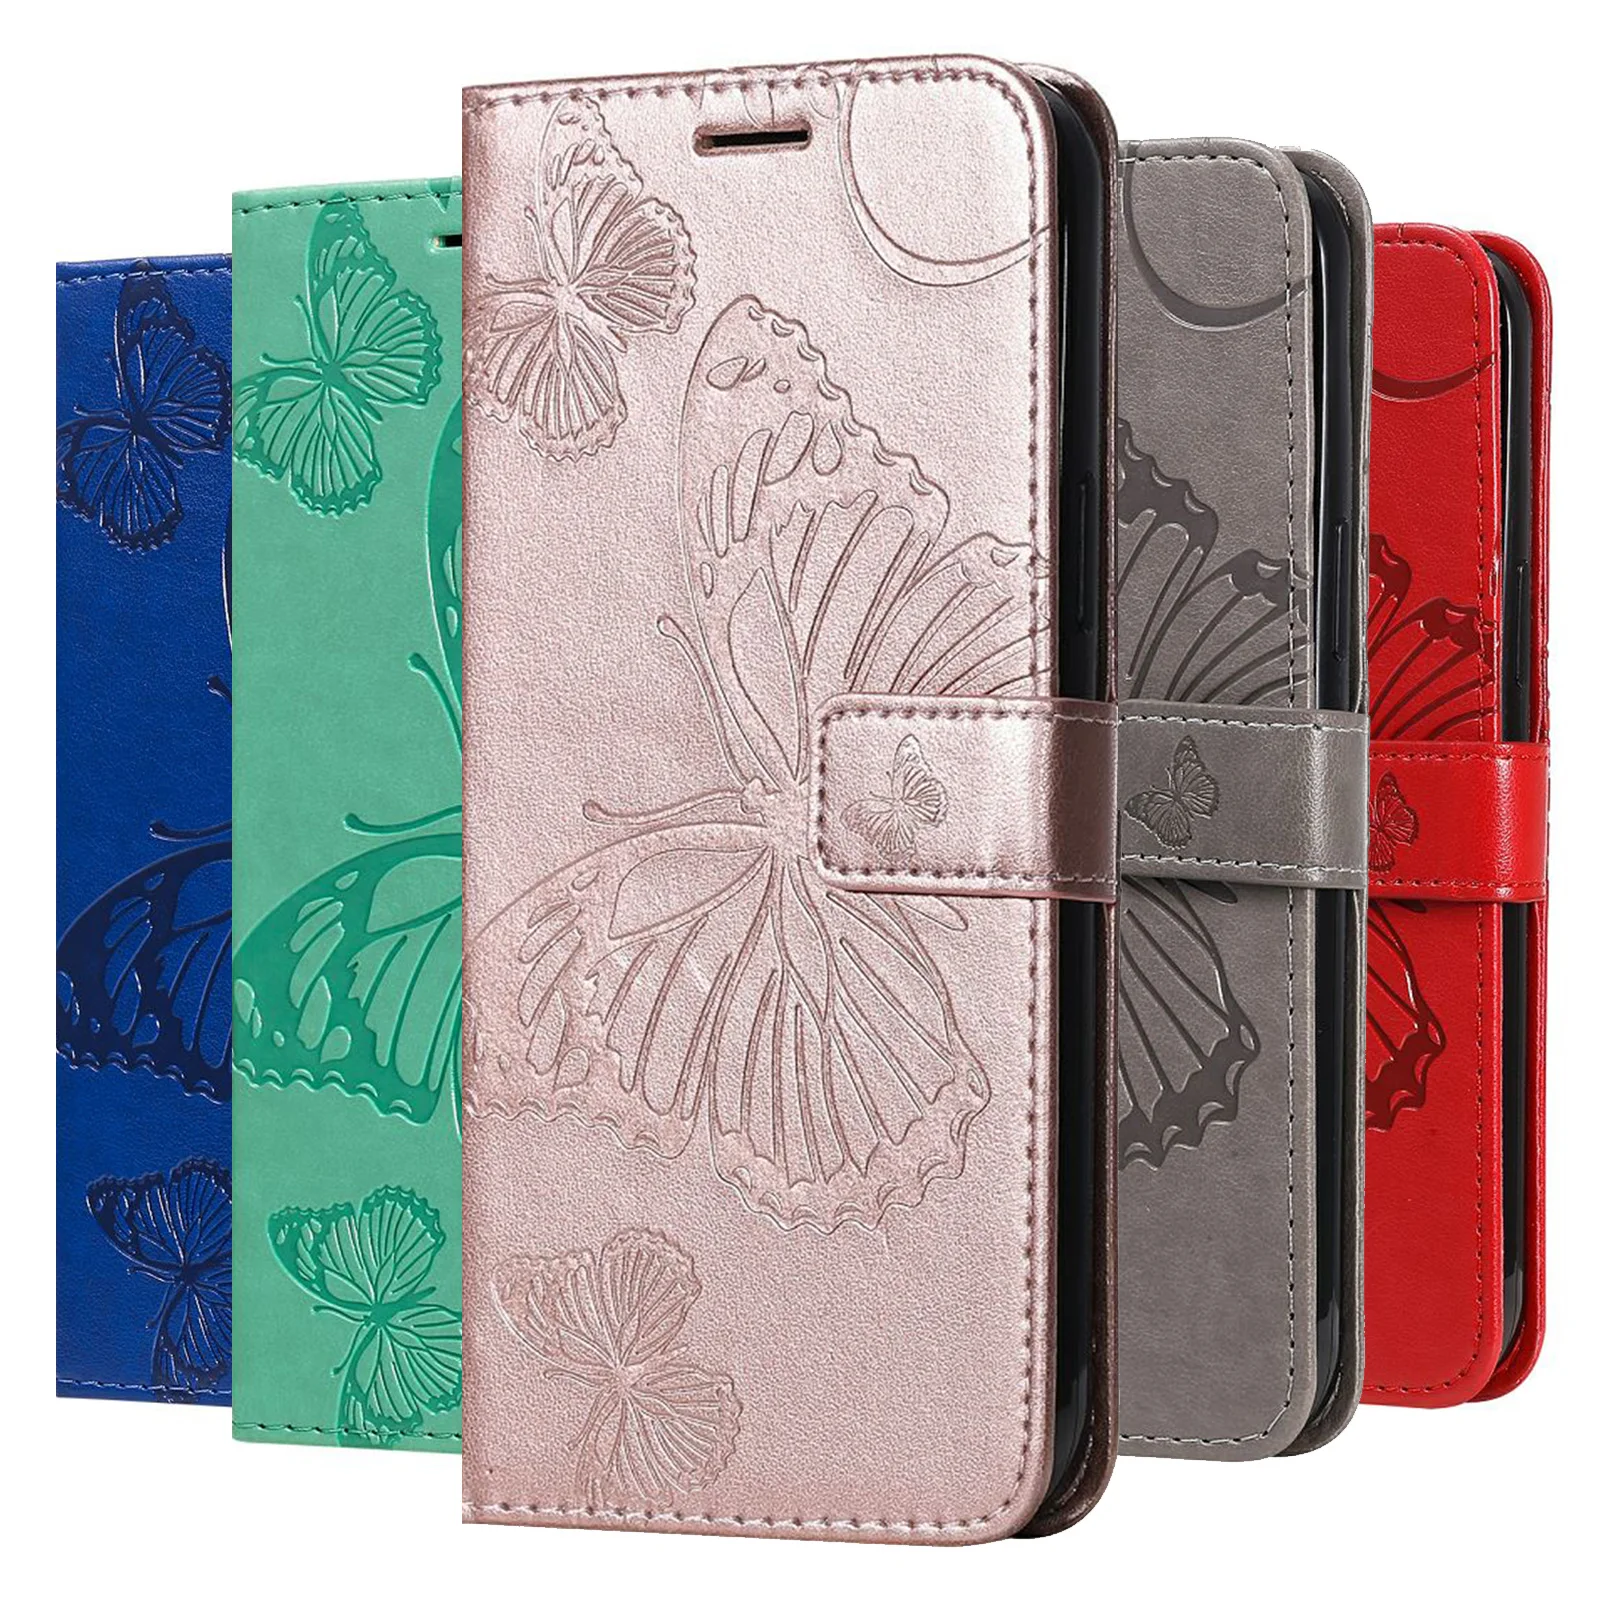 

Magnetic Wallet Flip Case Etui For OPPO A17 A57 A52 A72 A92 A53 A53S A73 A93 A54 A74 A94 A95 Reno 4Z 4 5 6 Pro Plus Phone Cover